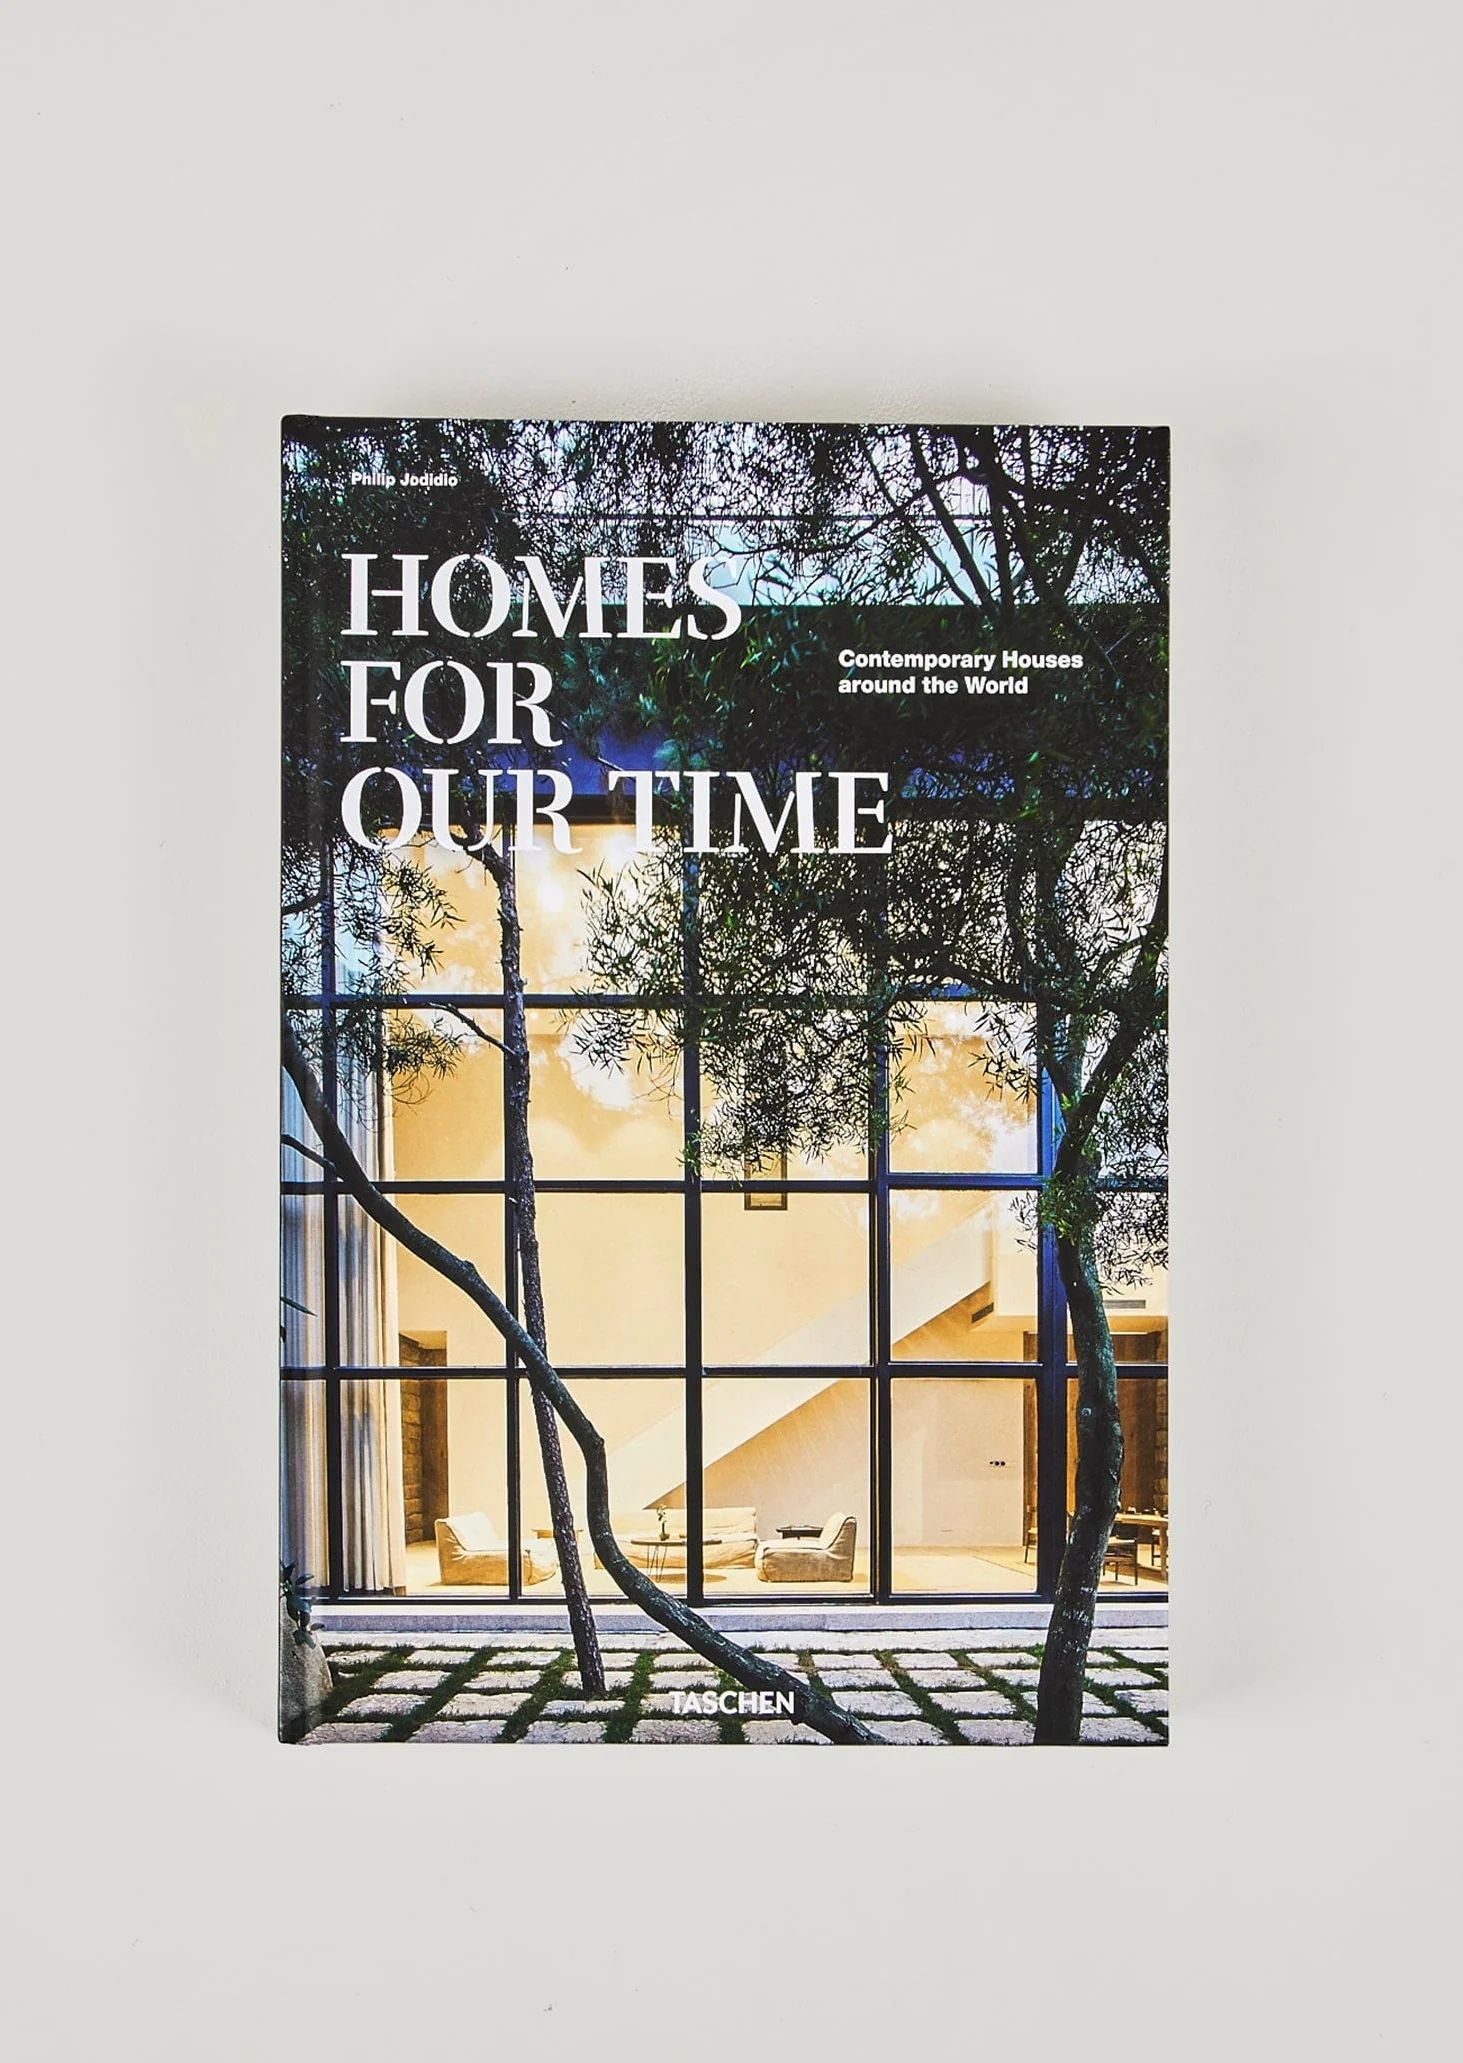 Coffee Table Book - "Homes For Our Time" | Afloral